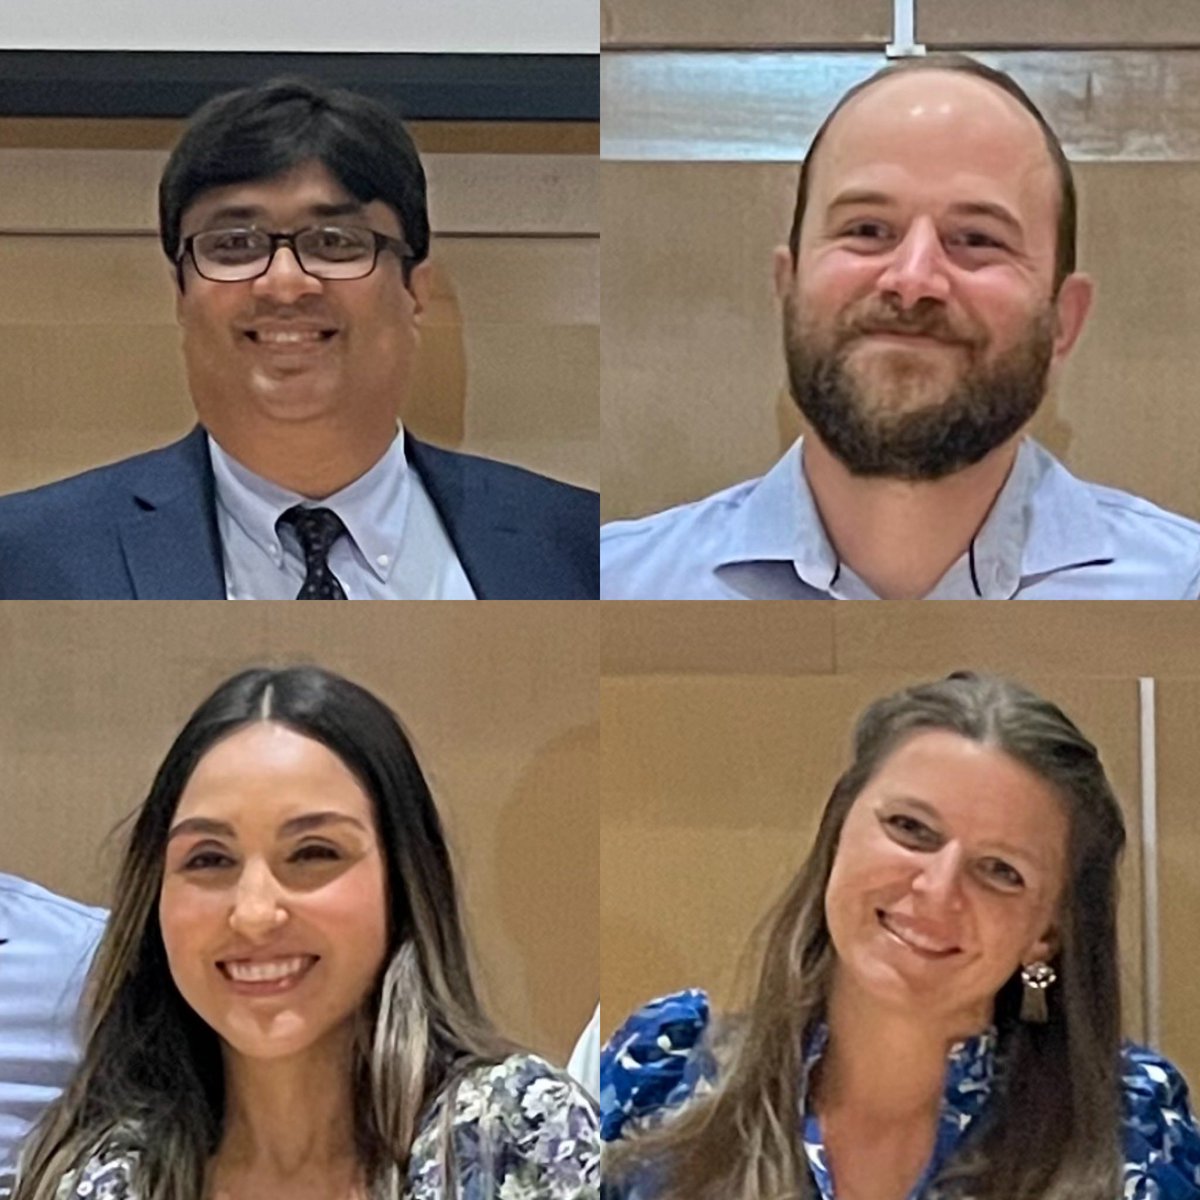 What a 🎸 Rockstar group of graduating @StrokeMiami fellows! A heartfelt ❤️ congratulations to Whitney, Veronica, Aaron, & Fawad, our first 4-fellow class = “The Original Fab 4” Whitney = The Clever One Veronica = The Quiet One Aaron = The Funny One Fawad = The Cute One